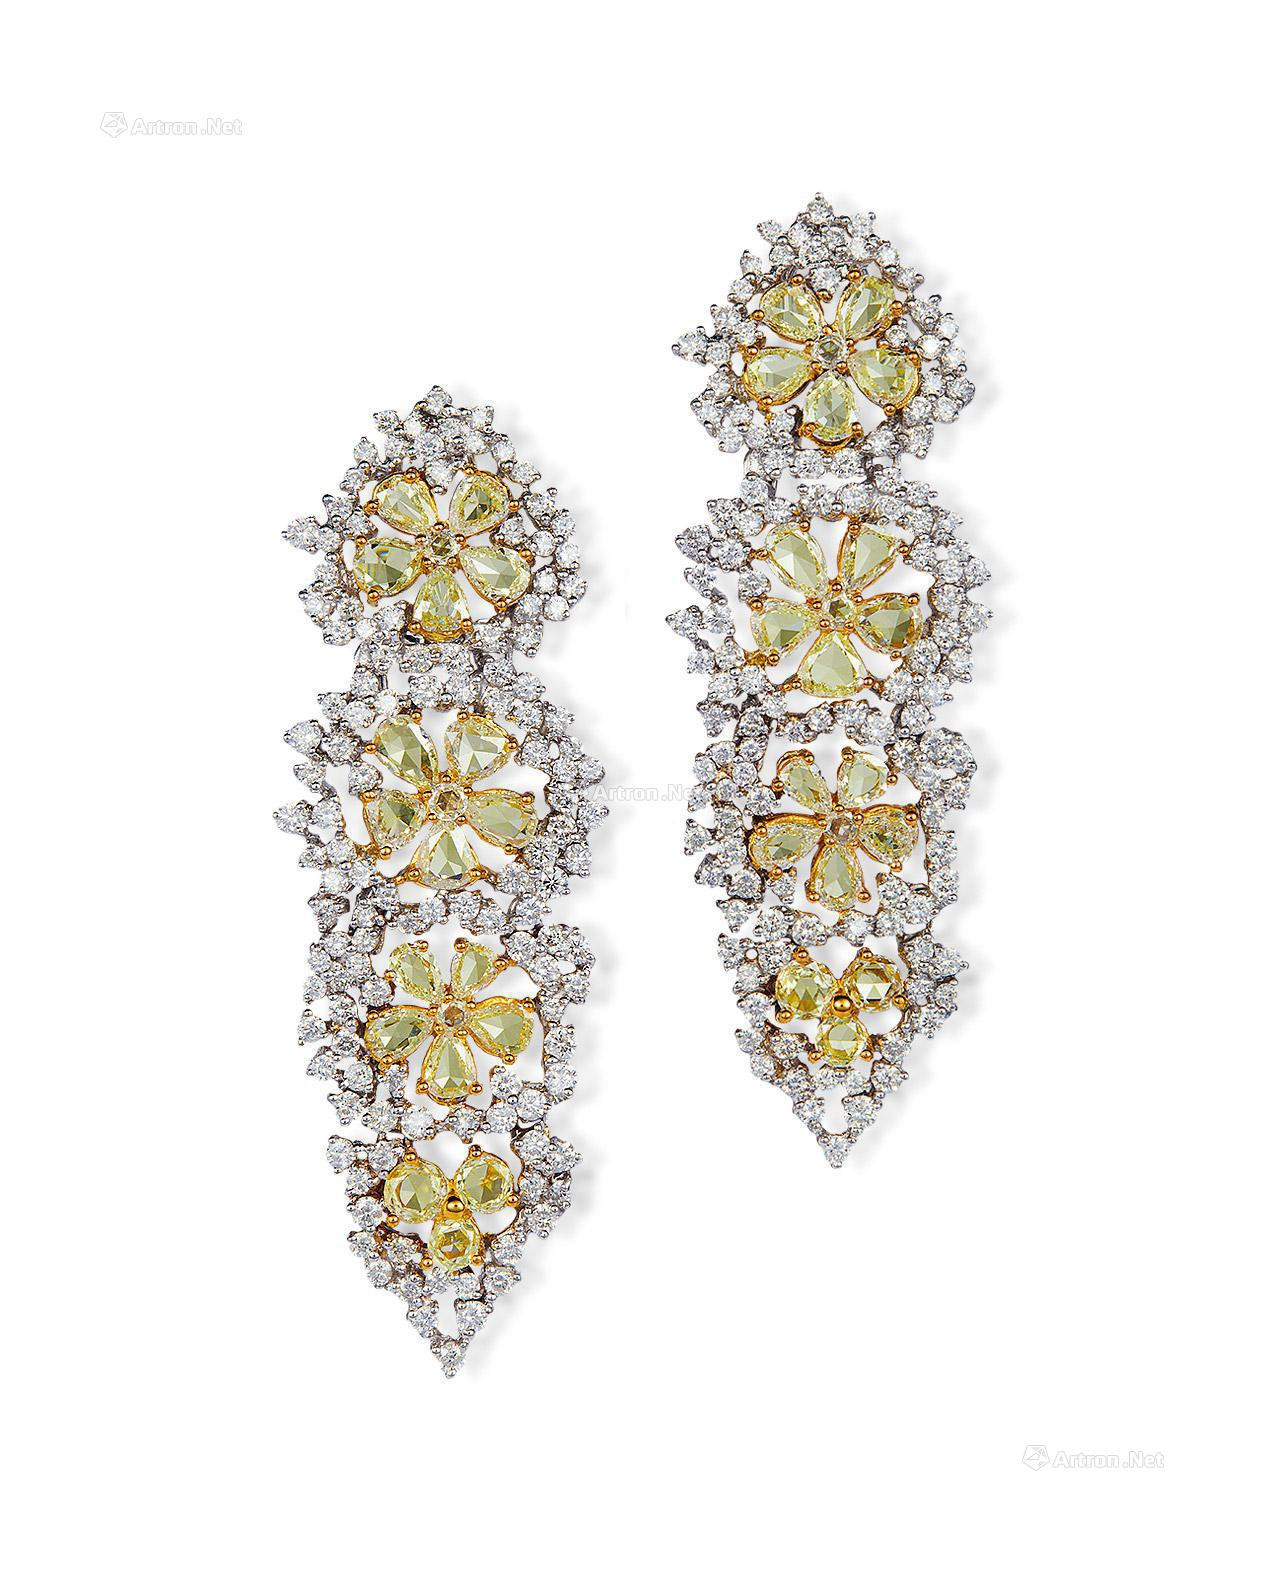 A PAIR OF ALTOGETHER WEIGHING 12.83 CARATS DIAMOND EAR PENDANTS MOUNTED IN 18K WHITE AND YELLOW GOLD